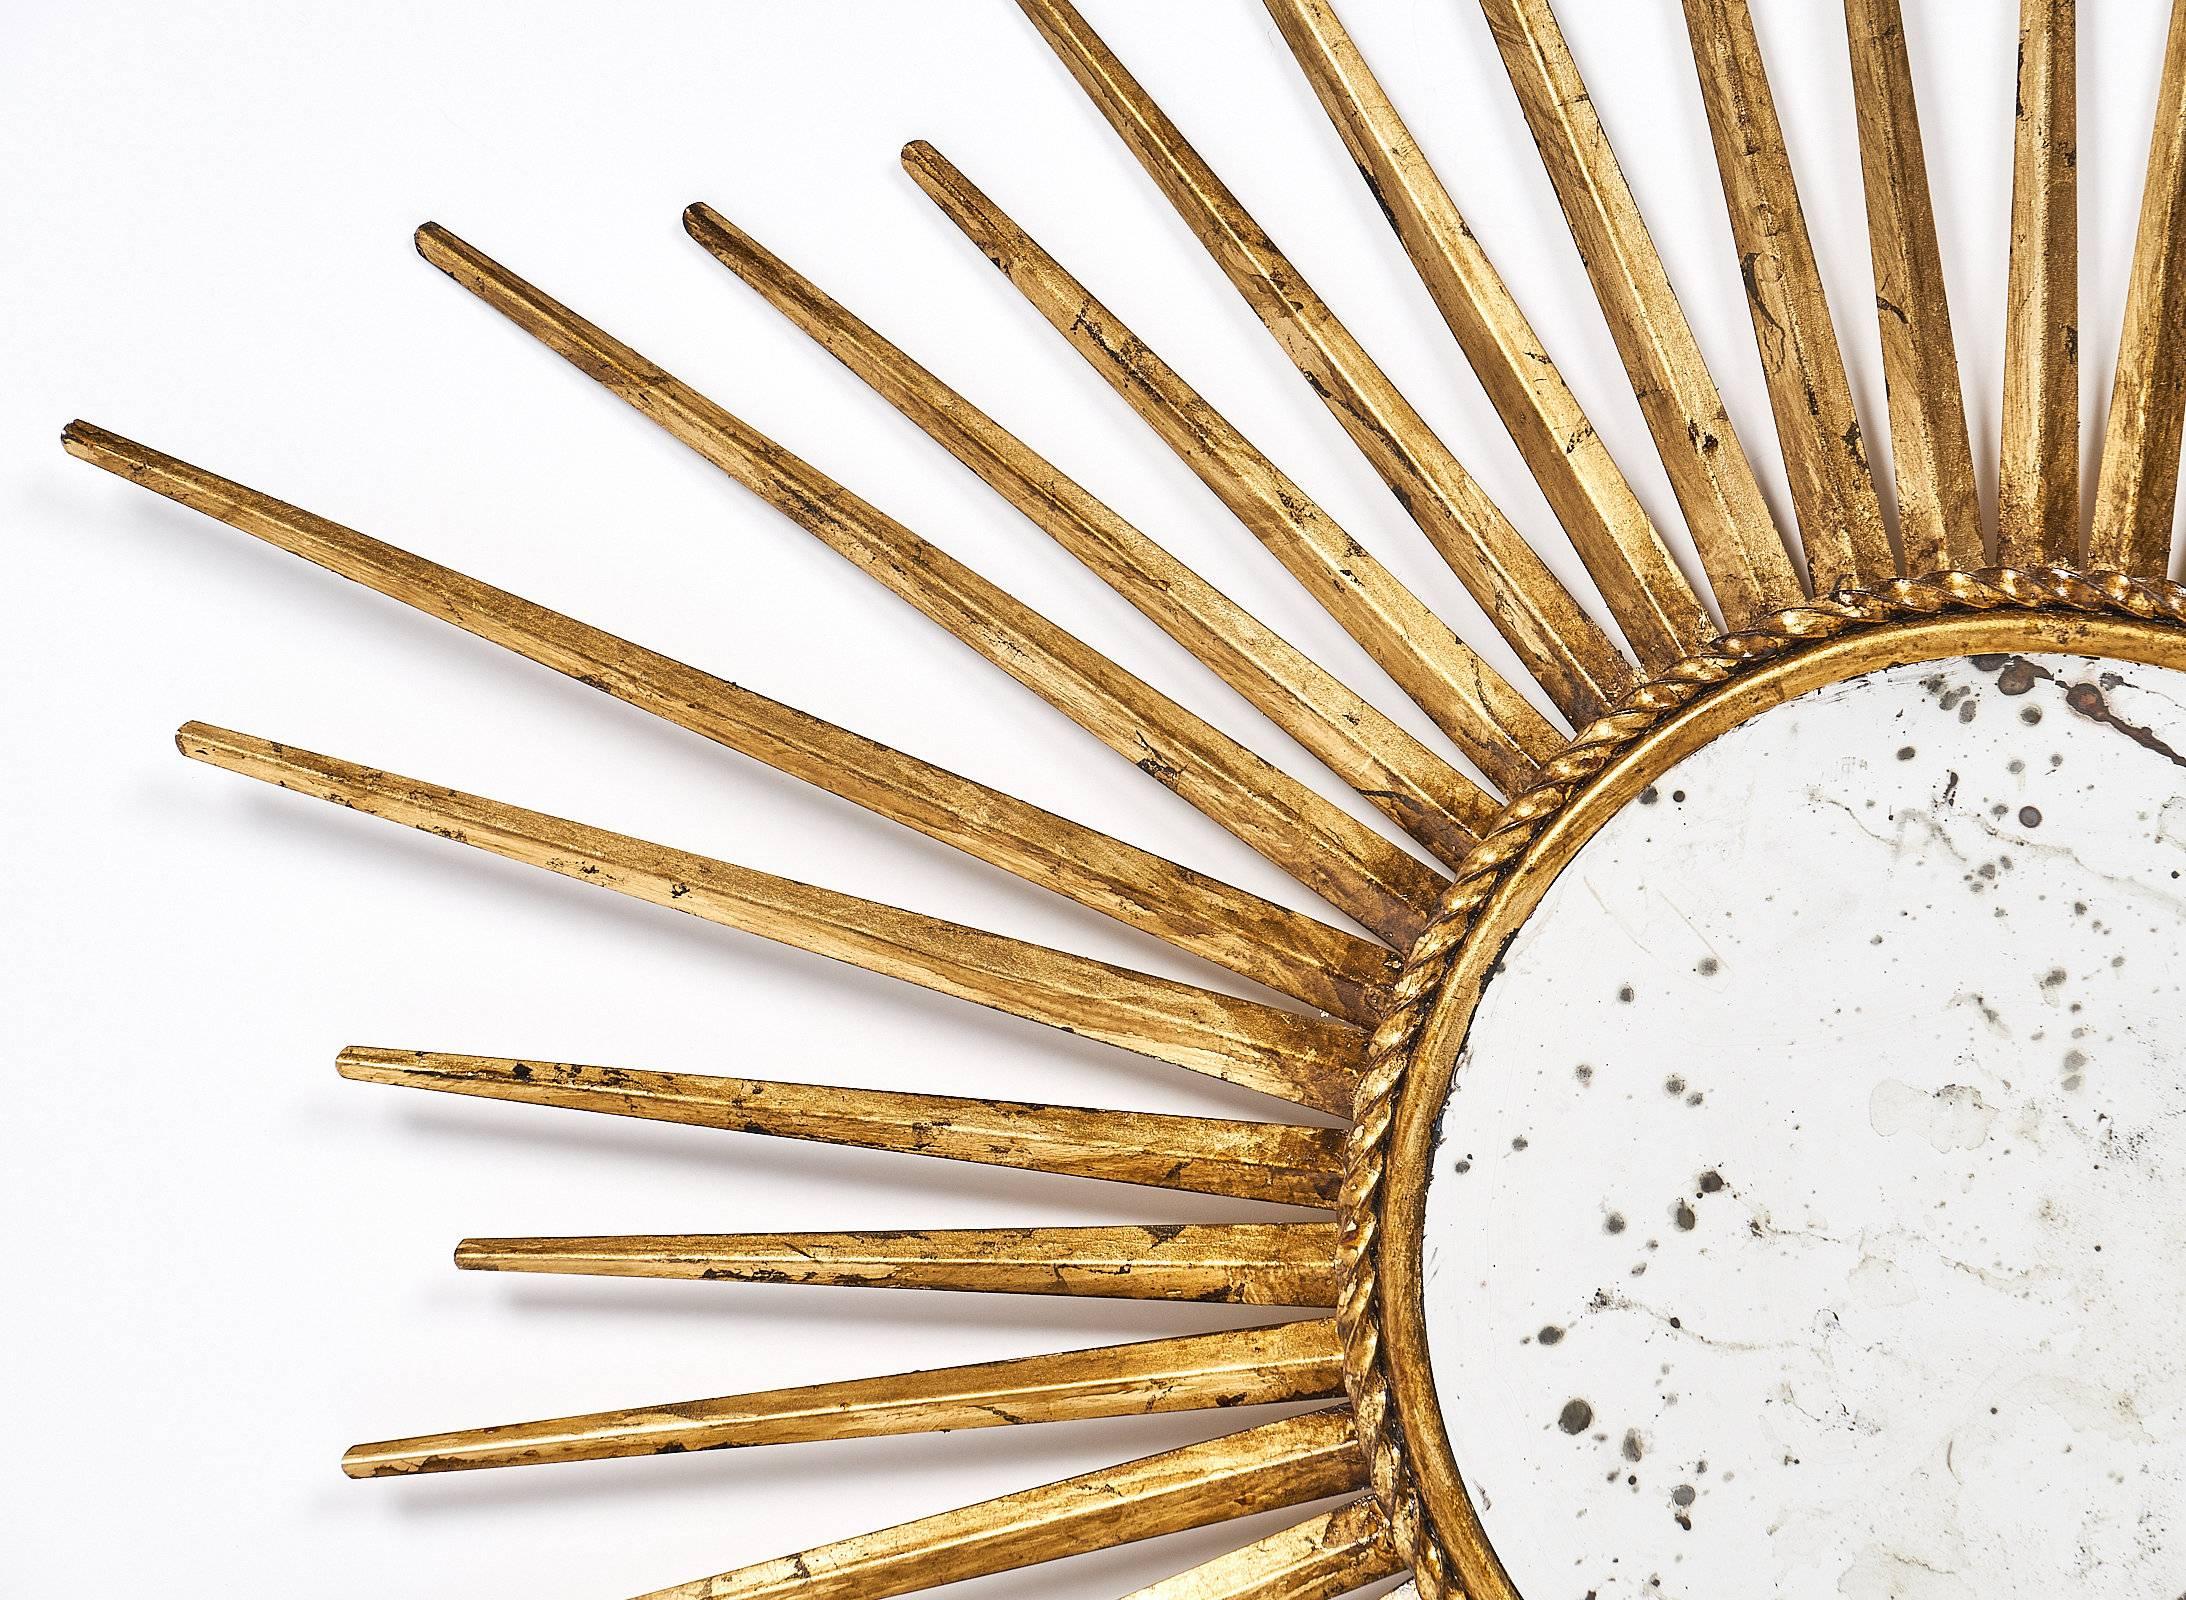 Sunburst shape mirror made of gilded metal and featuring an antiqued mirror as the center. This delightful French piece in the Mid-Century Modern style is the perfect size for a bedroom or entryway, and the thin rays give it high impact. We love the